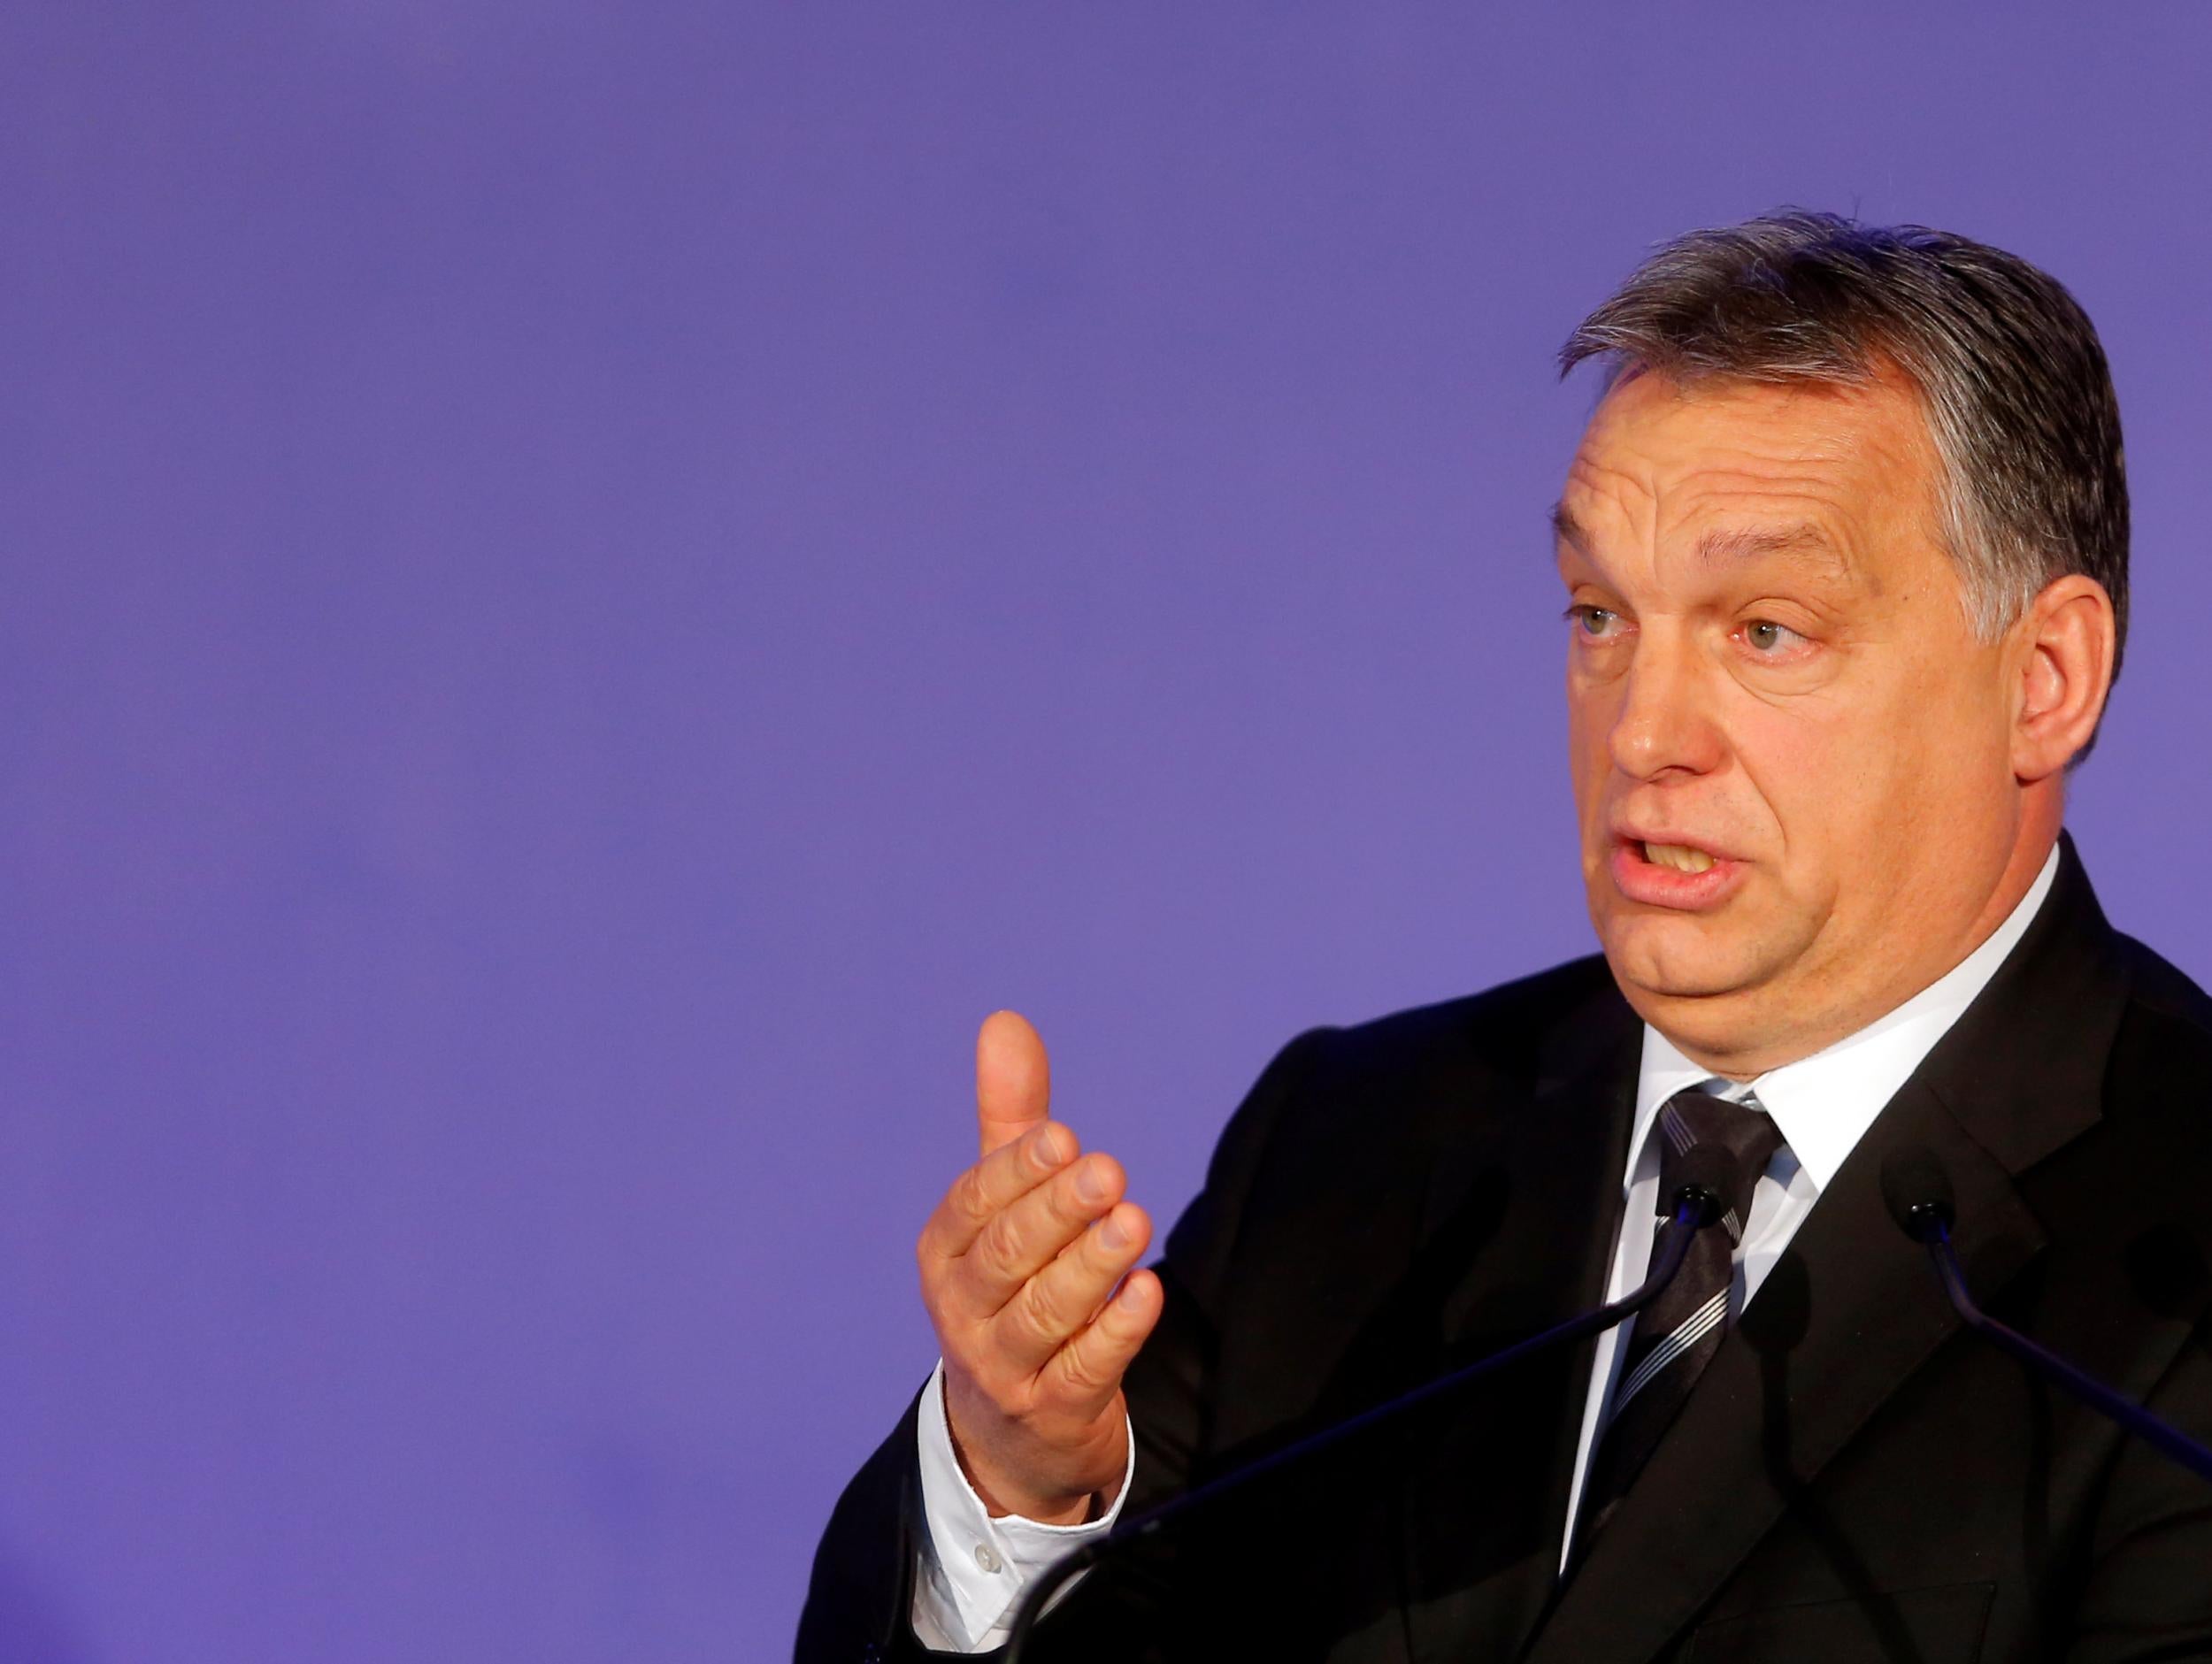 Hungarian Prime Minister Viktor Orban delivers a speech during a Lamfalussy Lectures Conference in Budapest